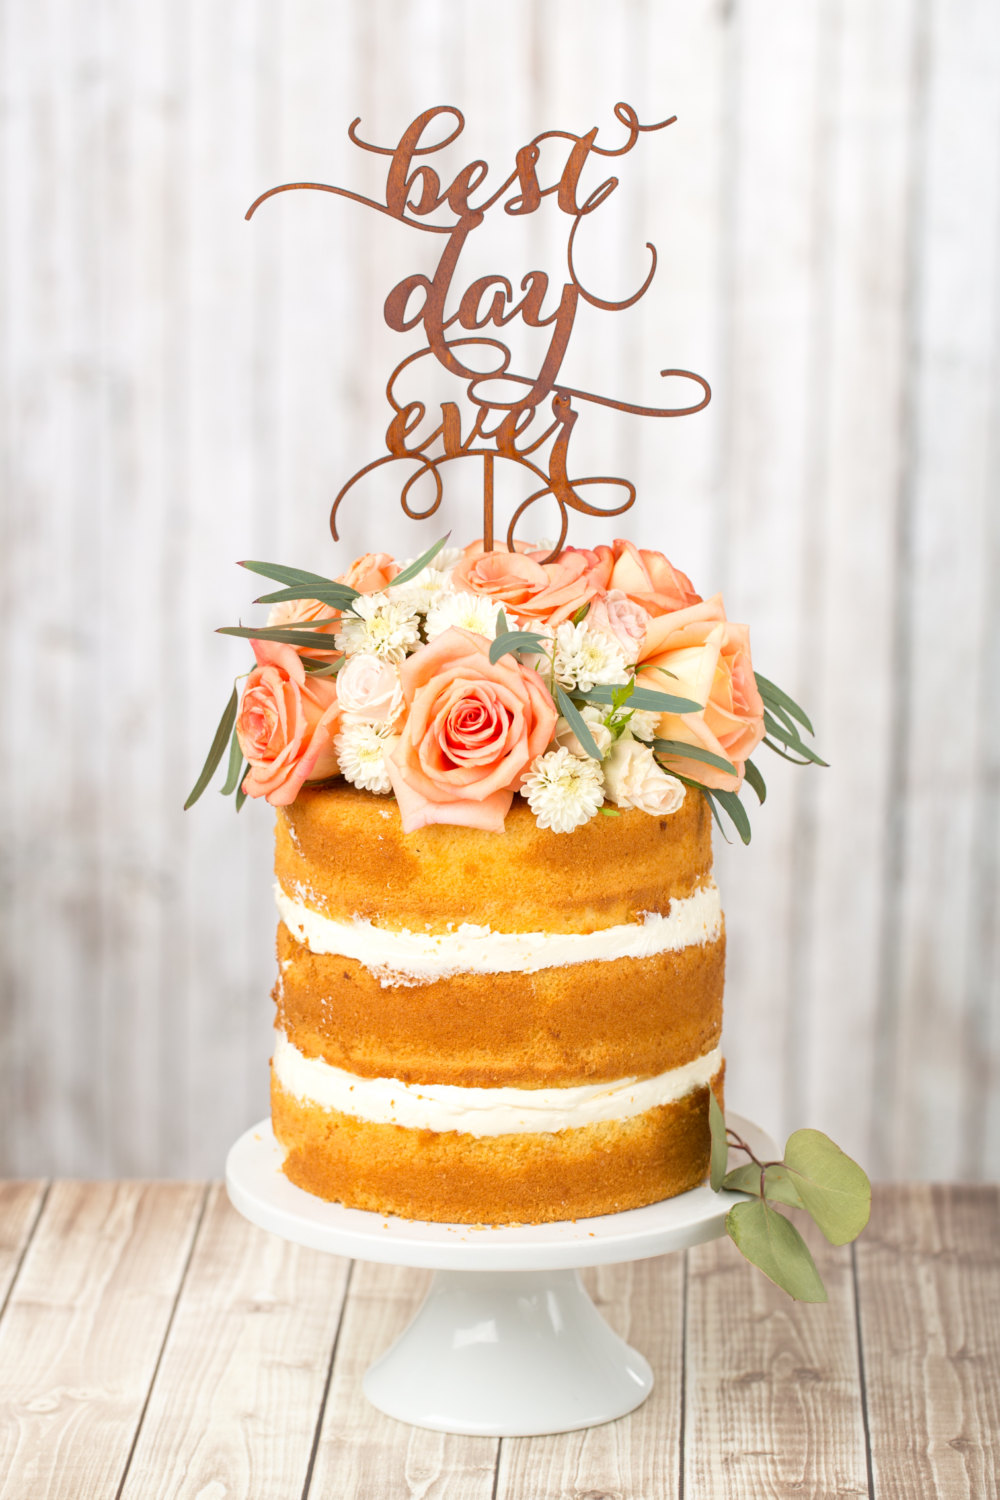 BEST DAY EVER - CAKE TOPPER